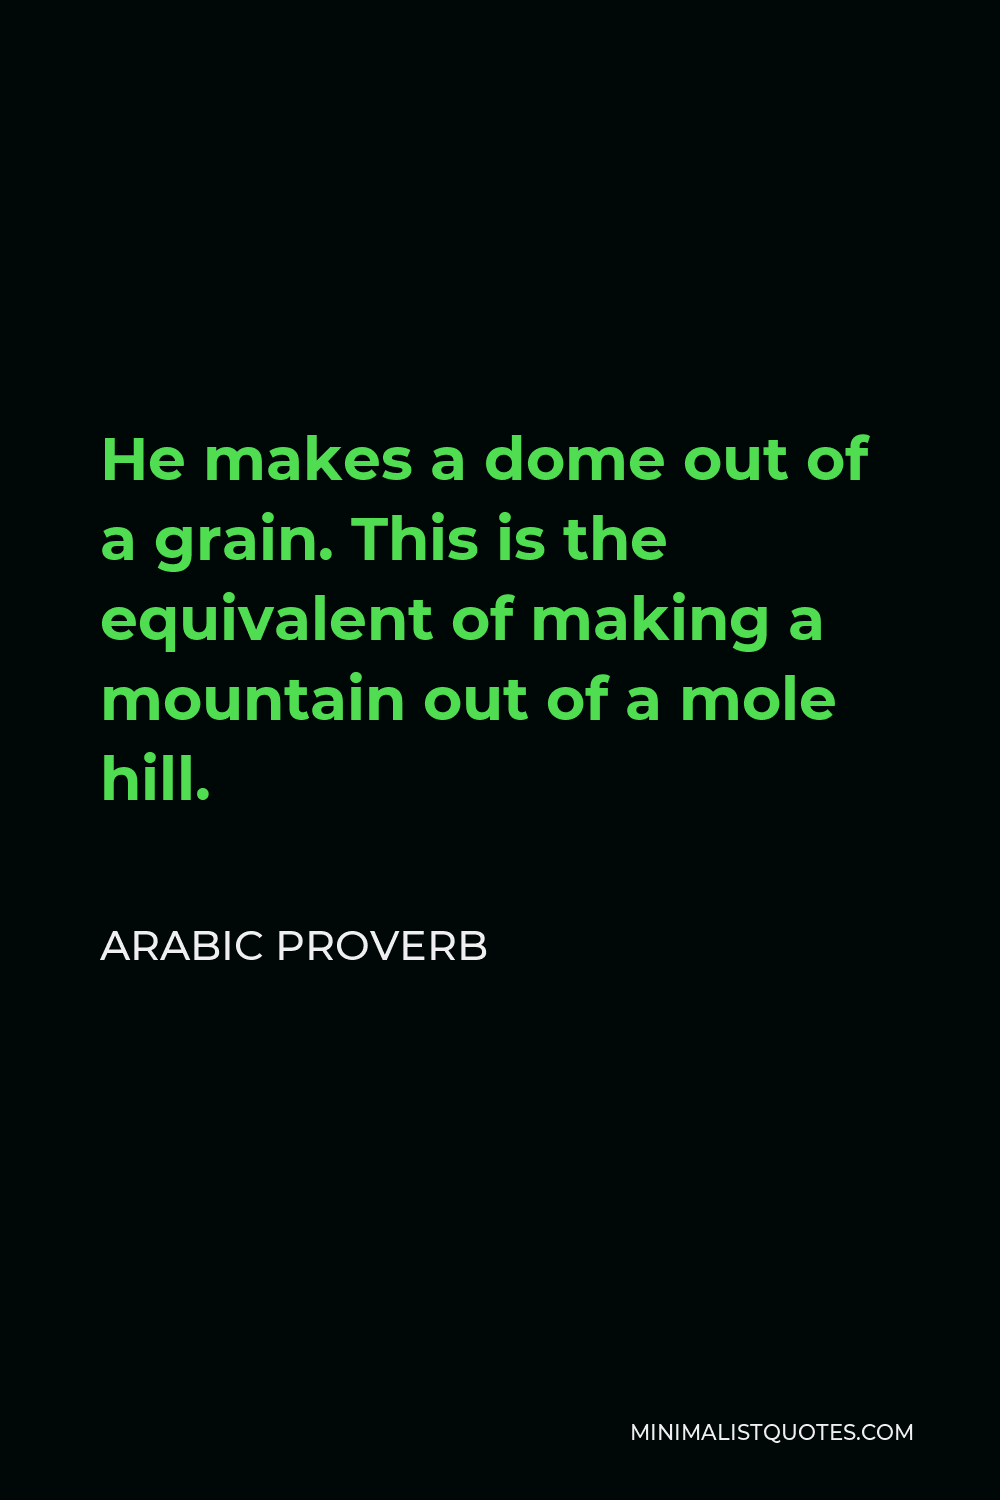 Arabic Proverb Quote - He makes a dome out of a grain. This is the equivalent of making a mountain out of a mole hill.